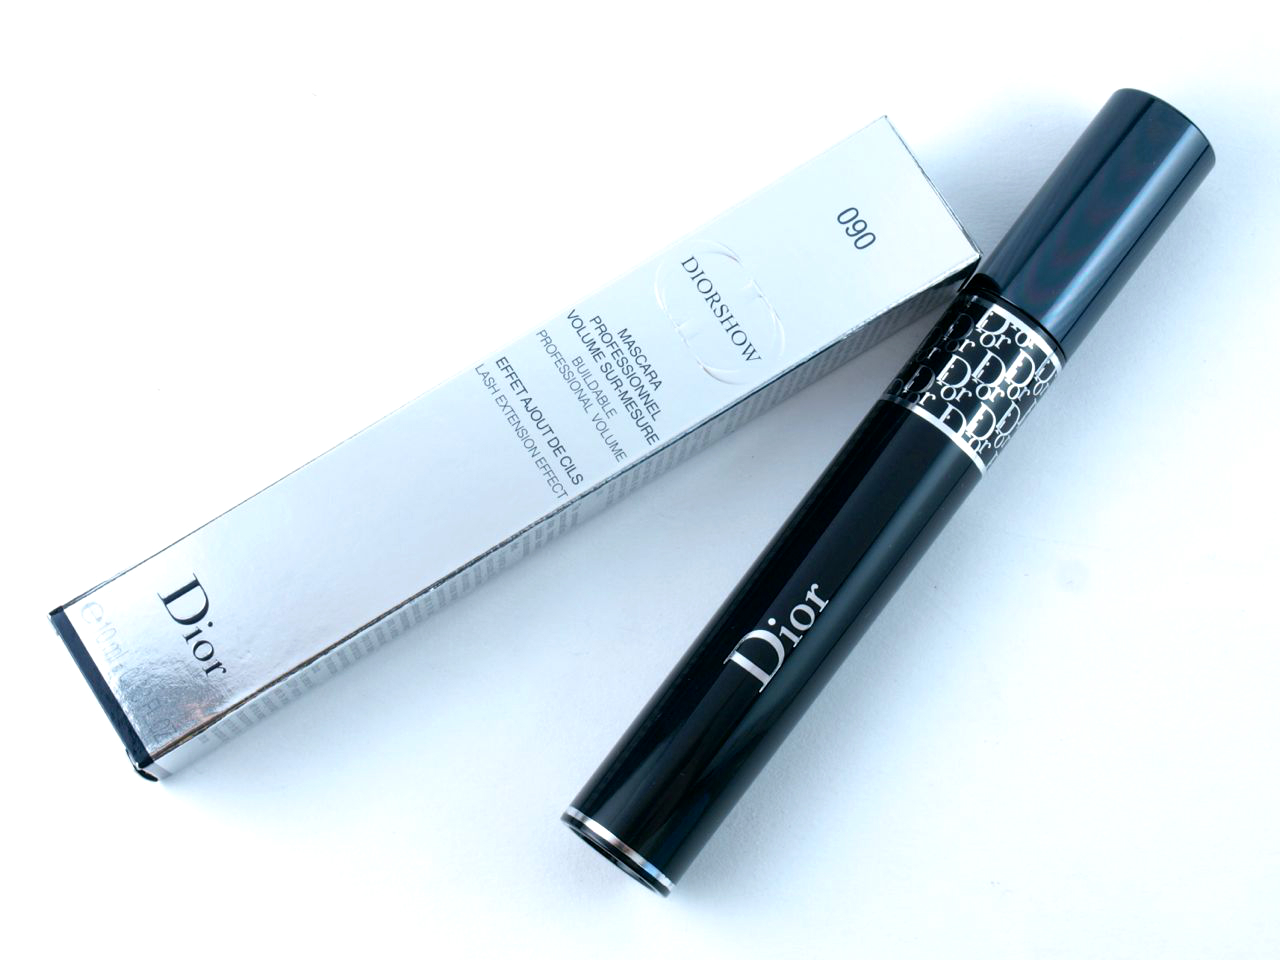 New 2015 Dior Diorshow Mascara with Lash Extension Effect in "090 Pro Black": Review and Swatches